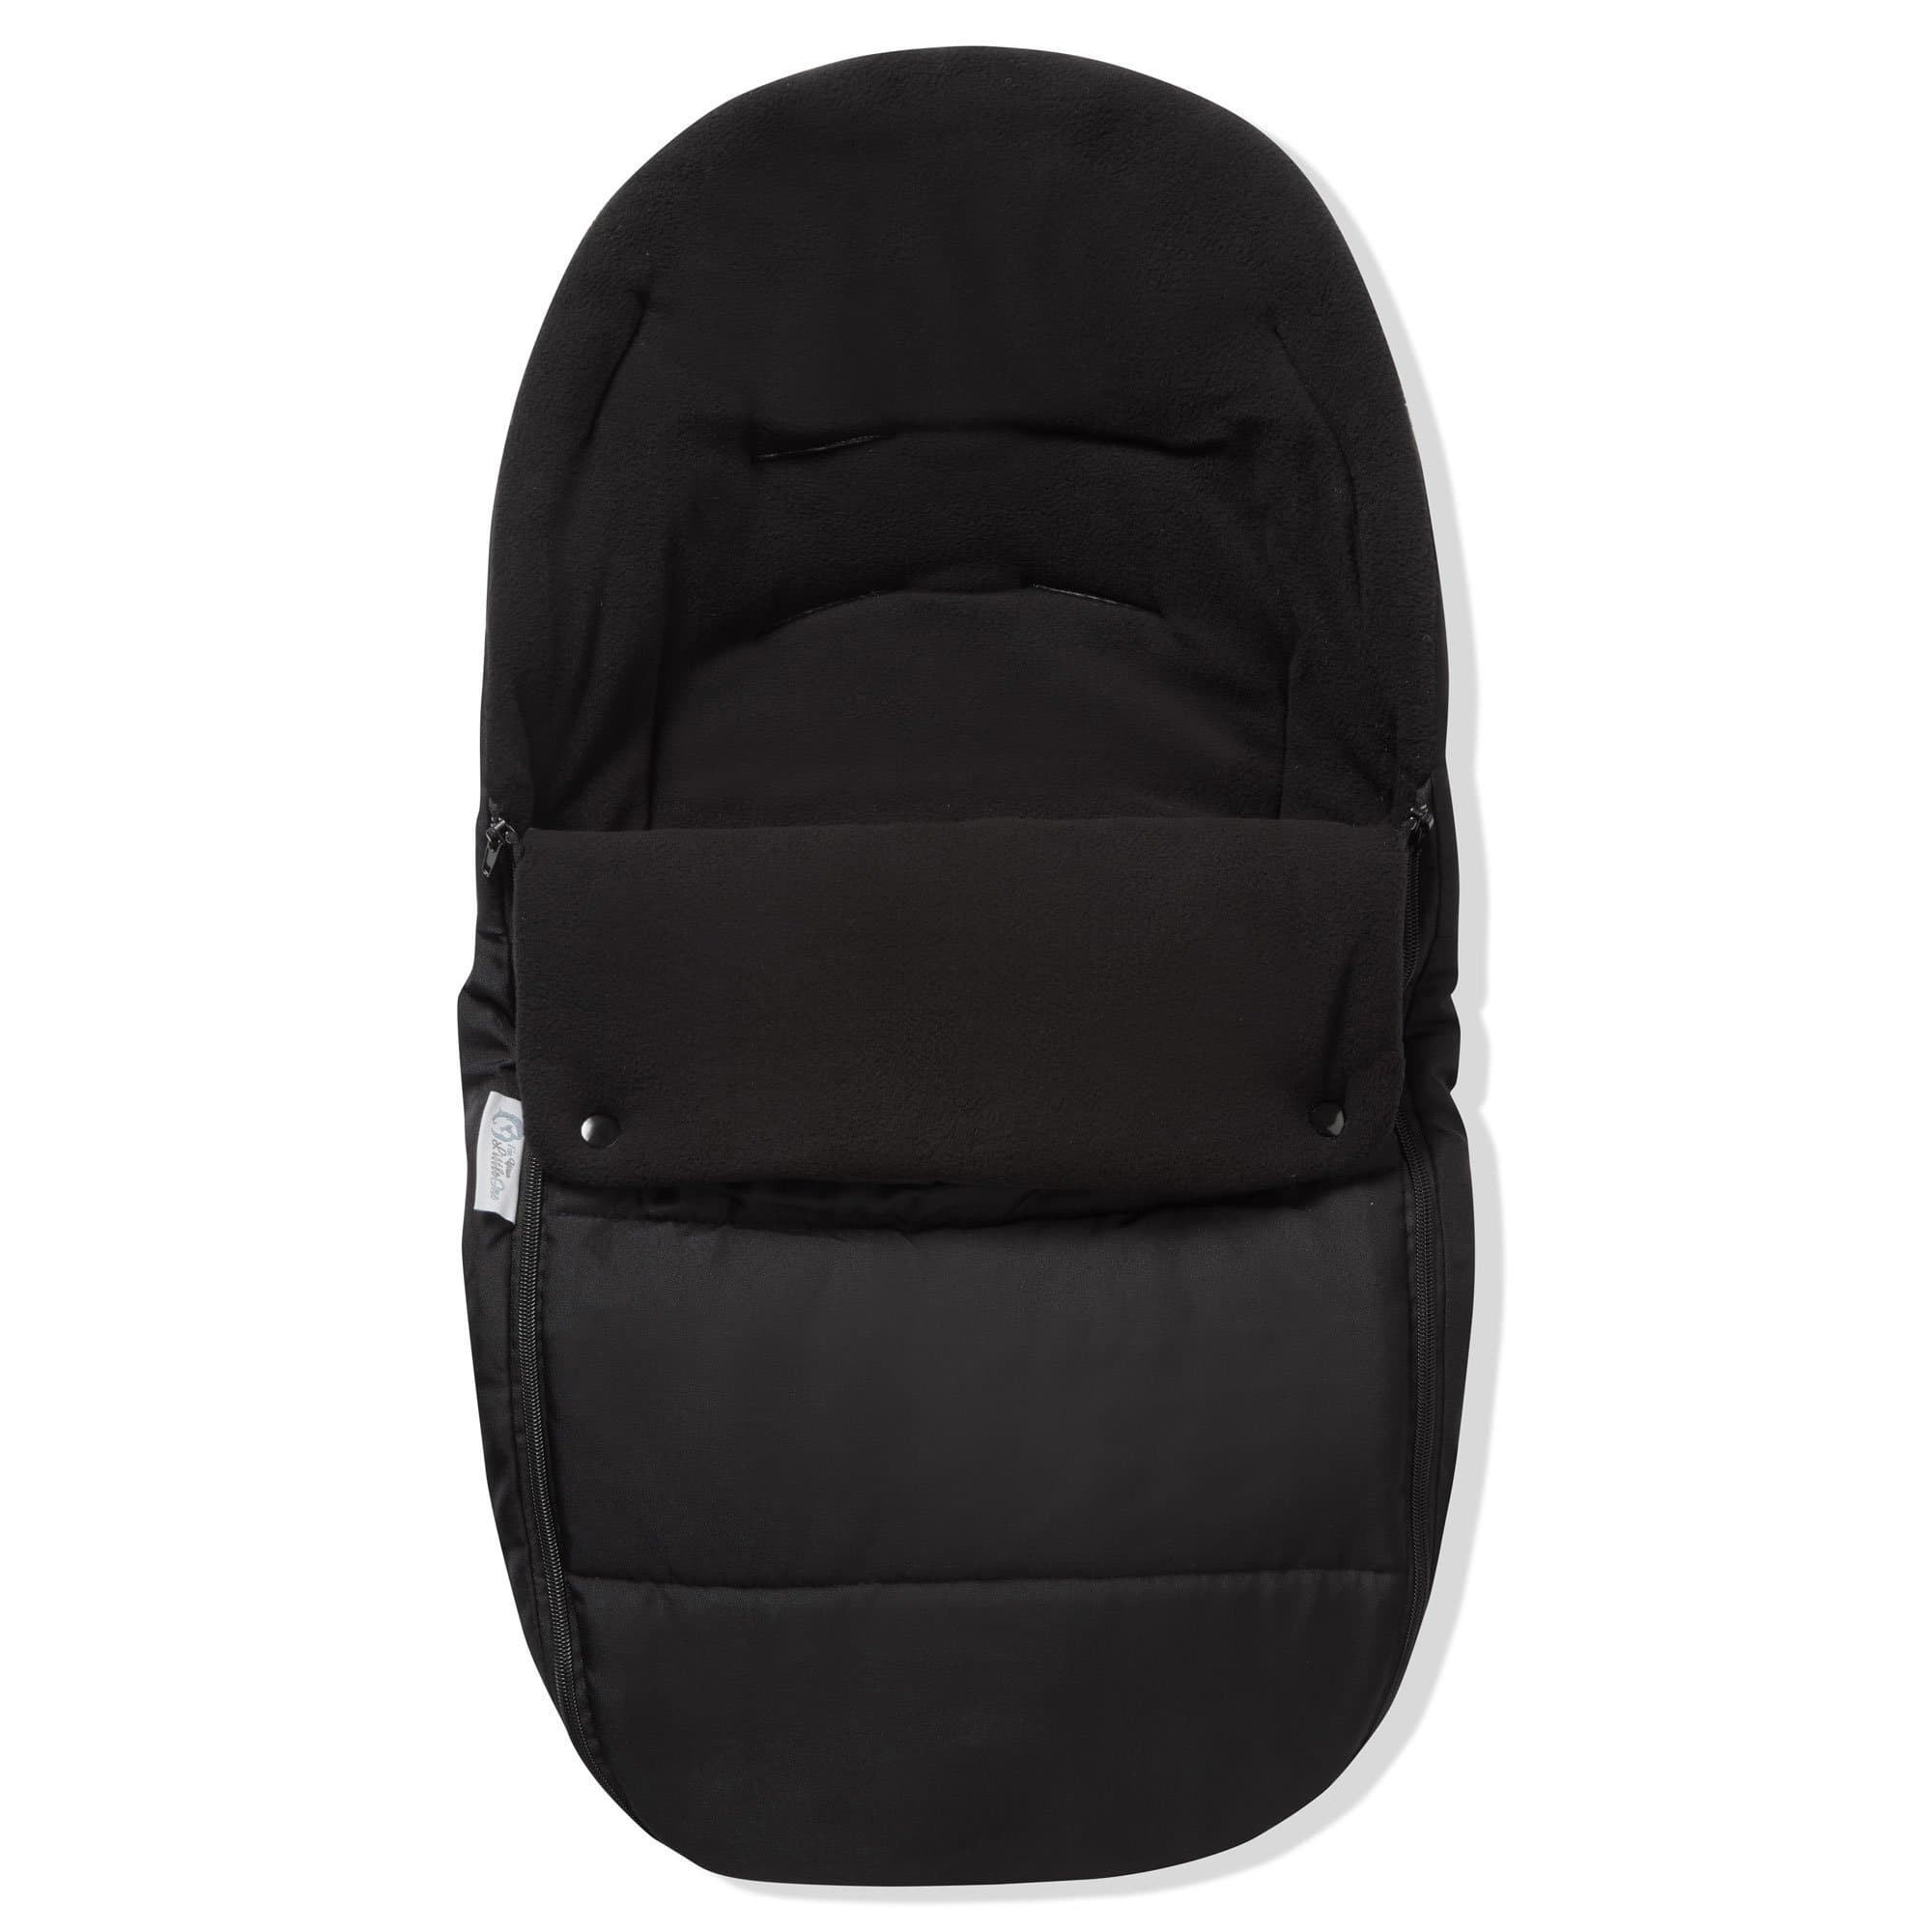 Premium Car Seat Footmuff / Cosy Toes Compatible with Cosatto - Black Jack / Fits All Models | For Your Little One